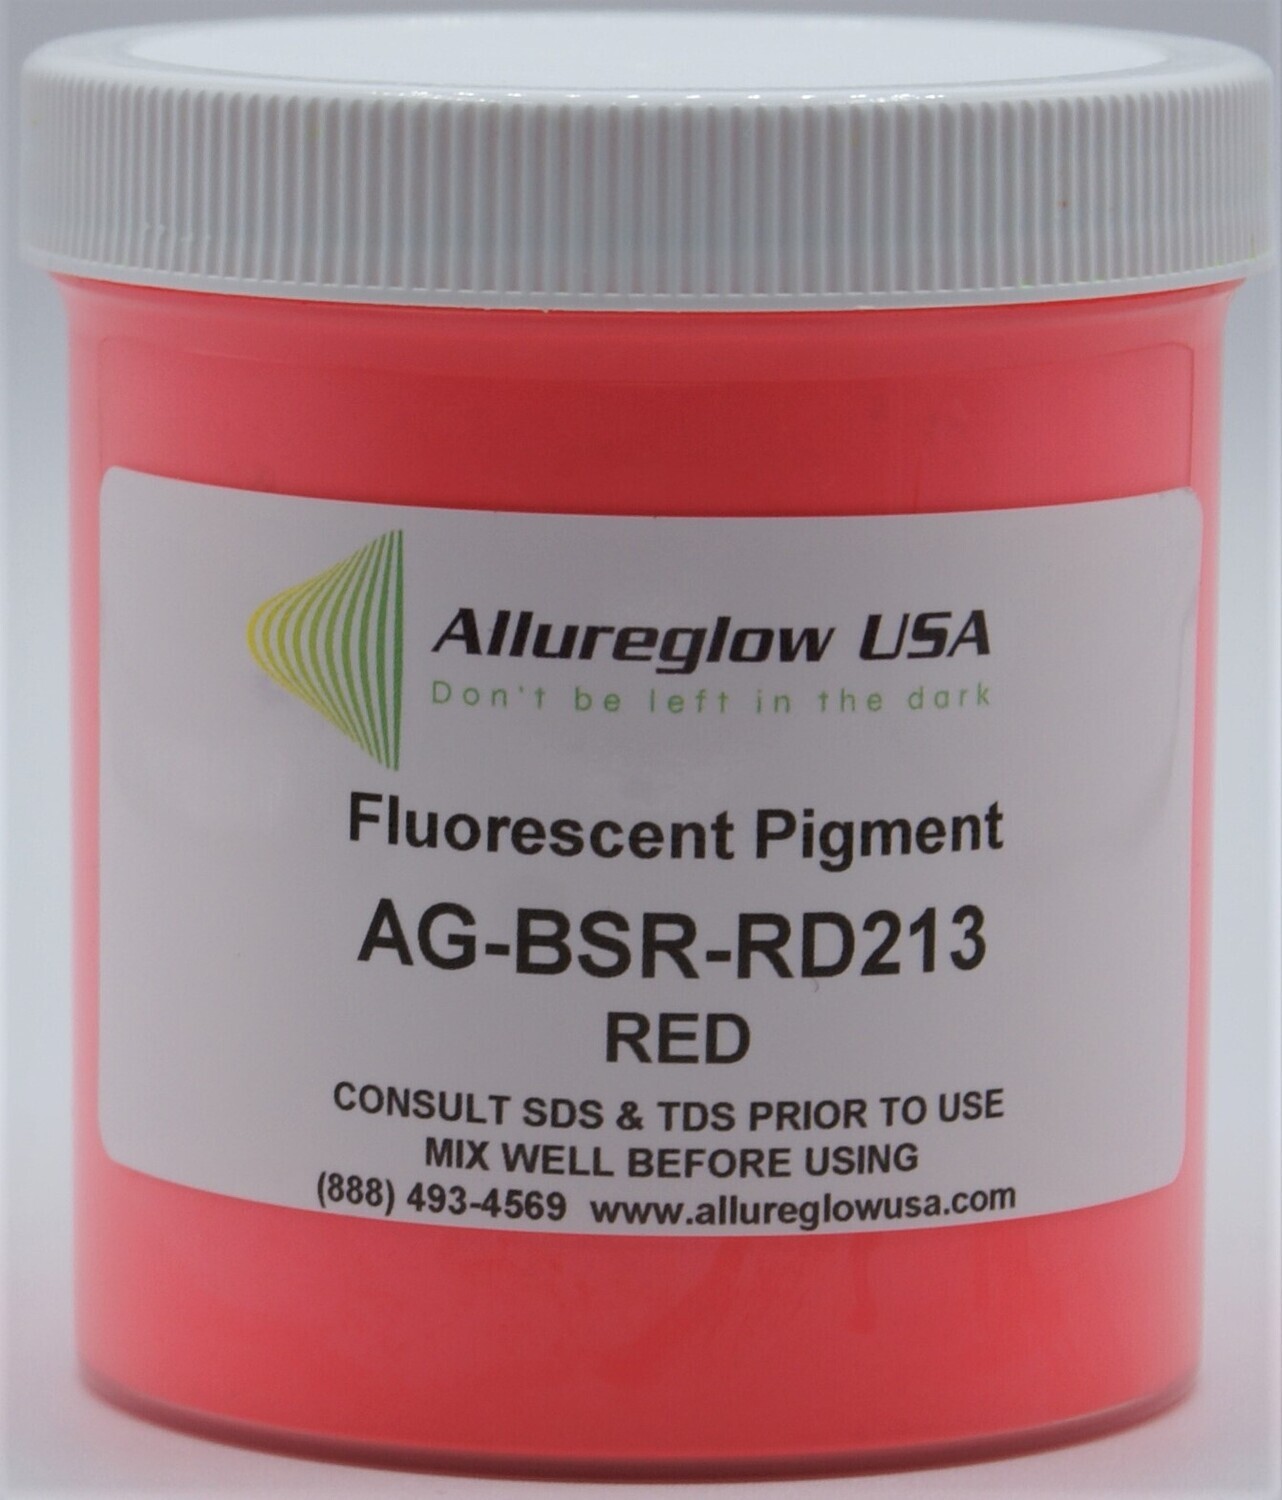 AG-BSR-RD213-50 RED FLUORESCENT or BLACKLIGHT PIGMENTS - 50 GRAMS